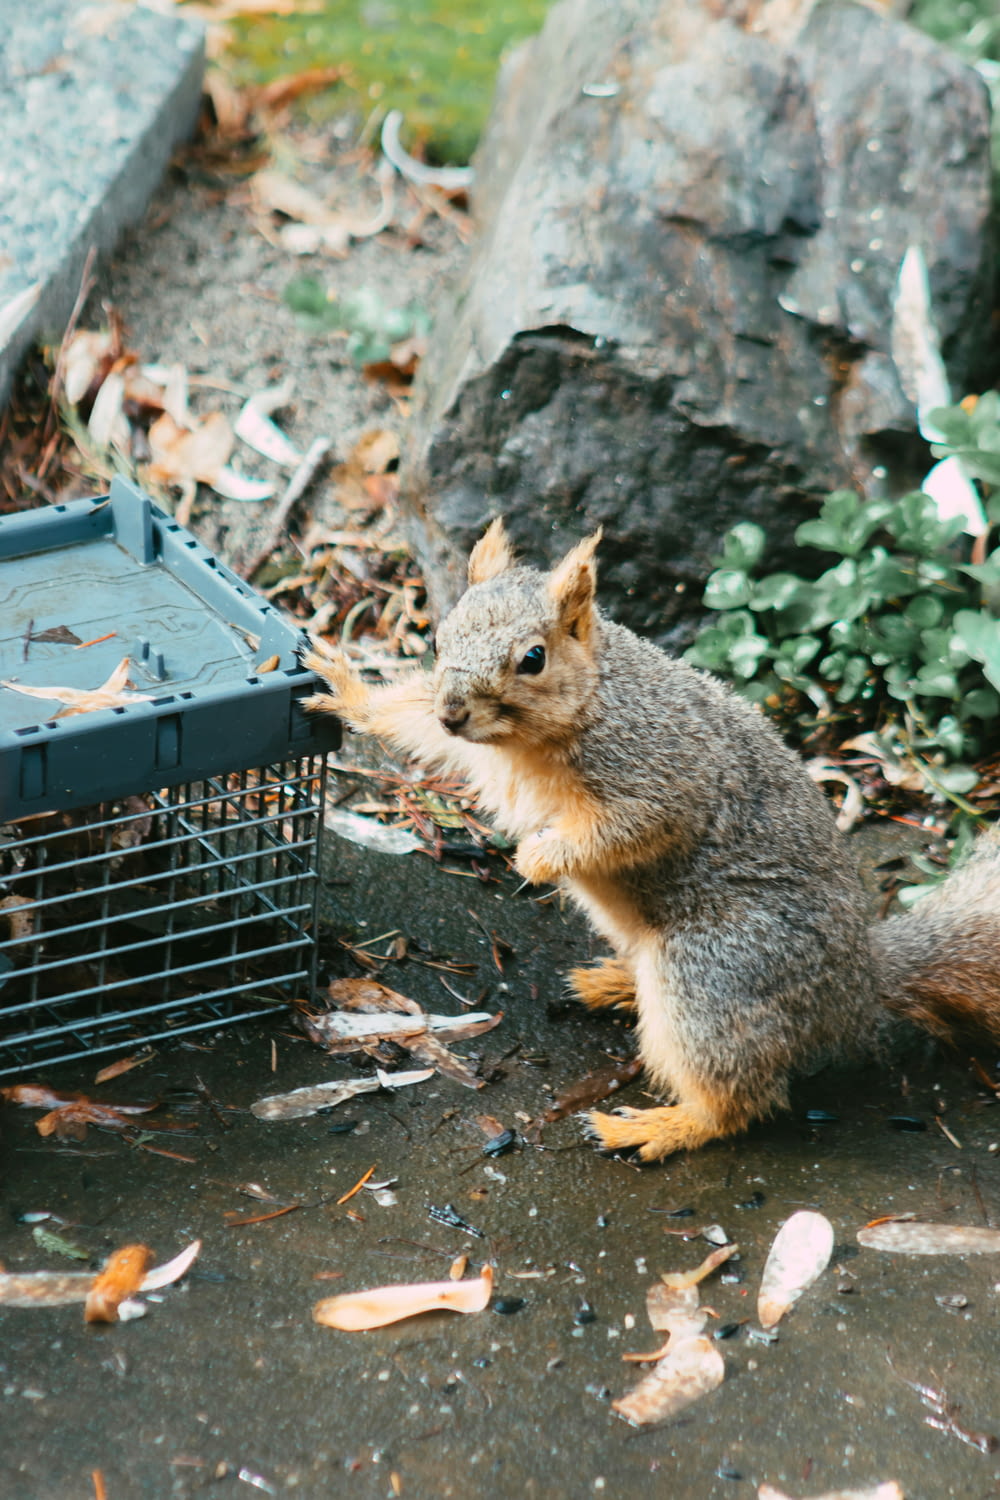 a squirrel sitting on the ground next to a cage